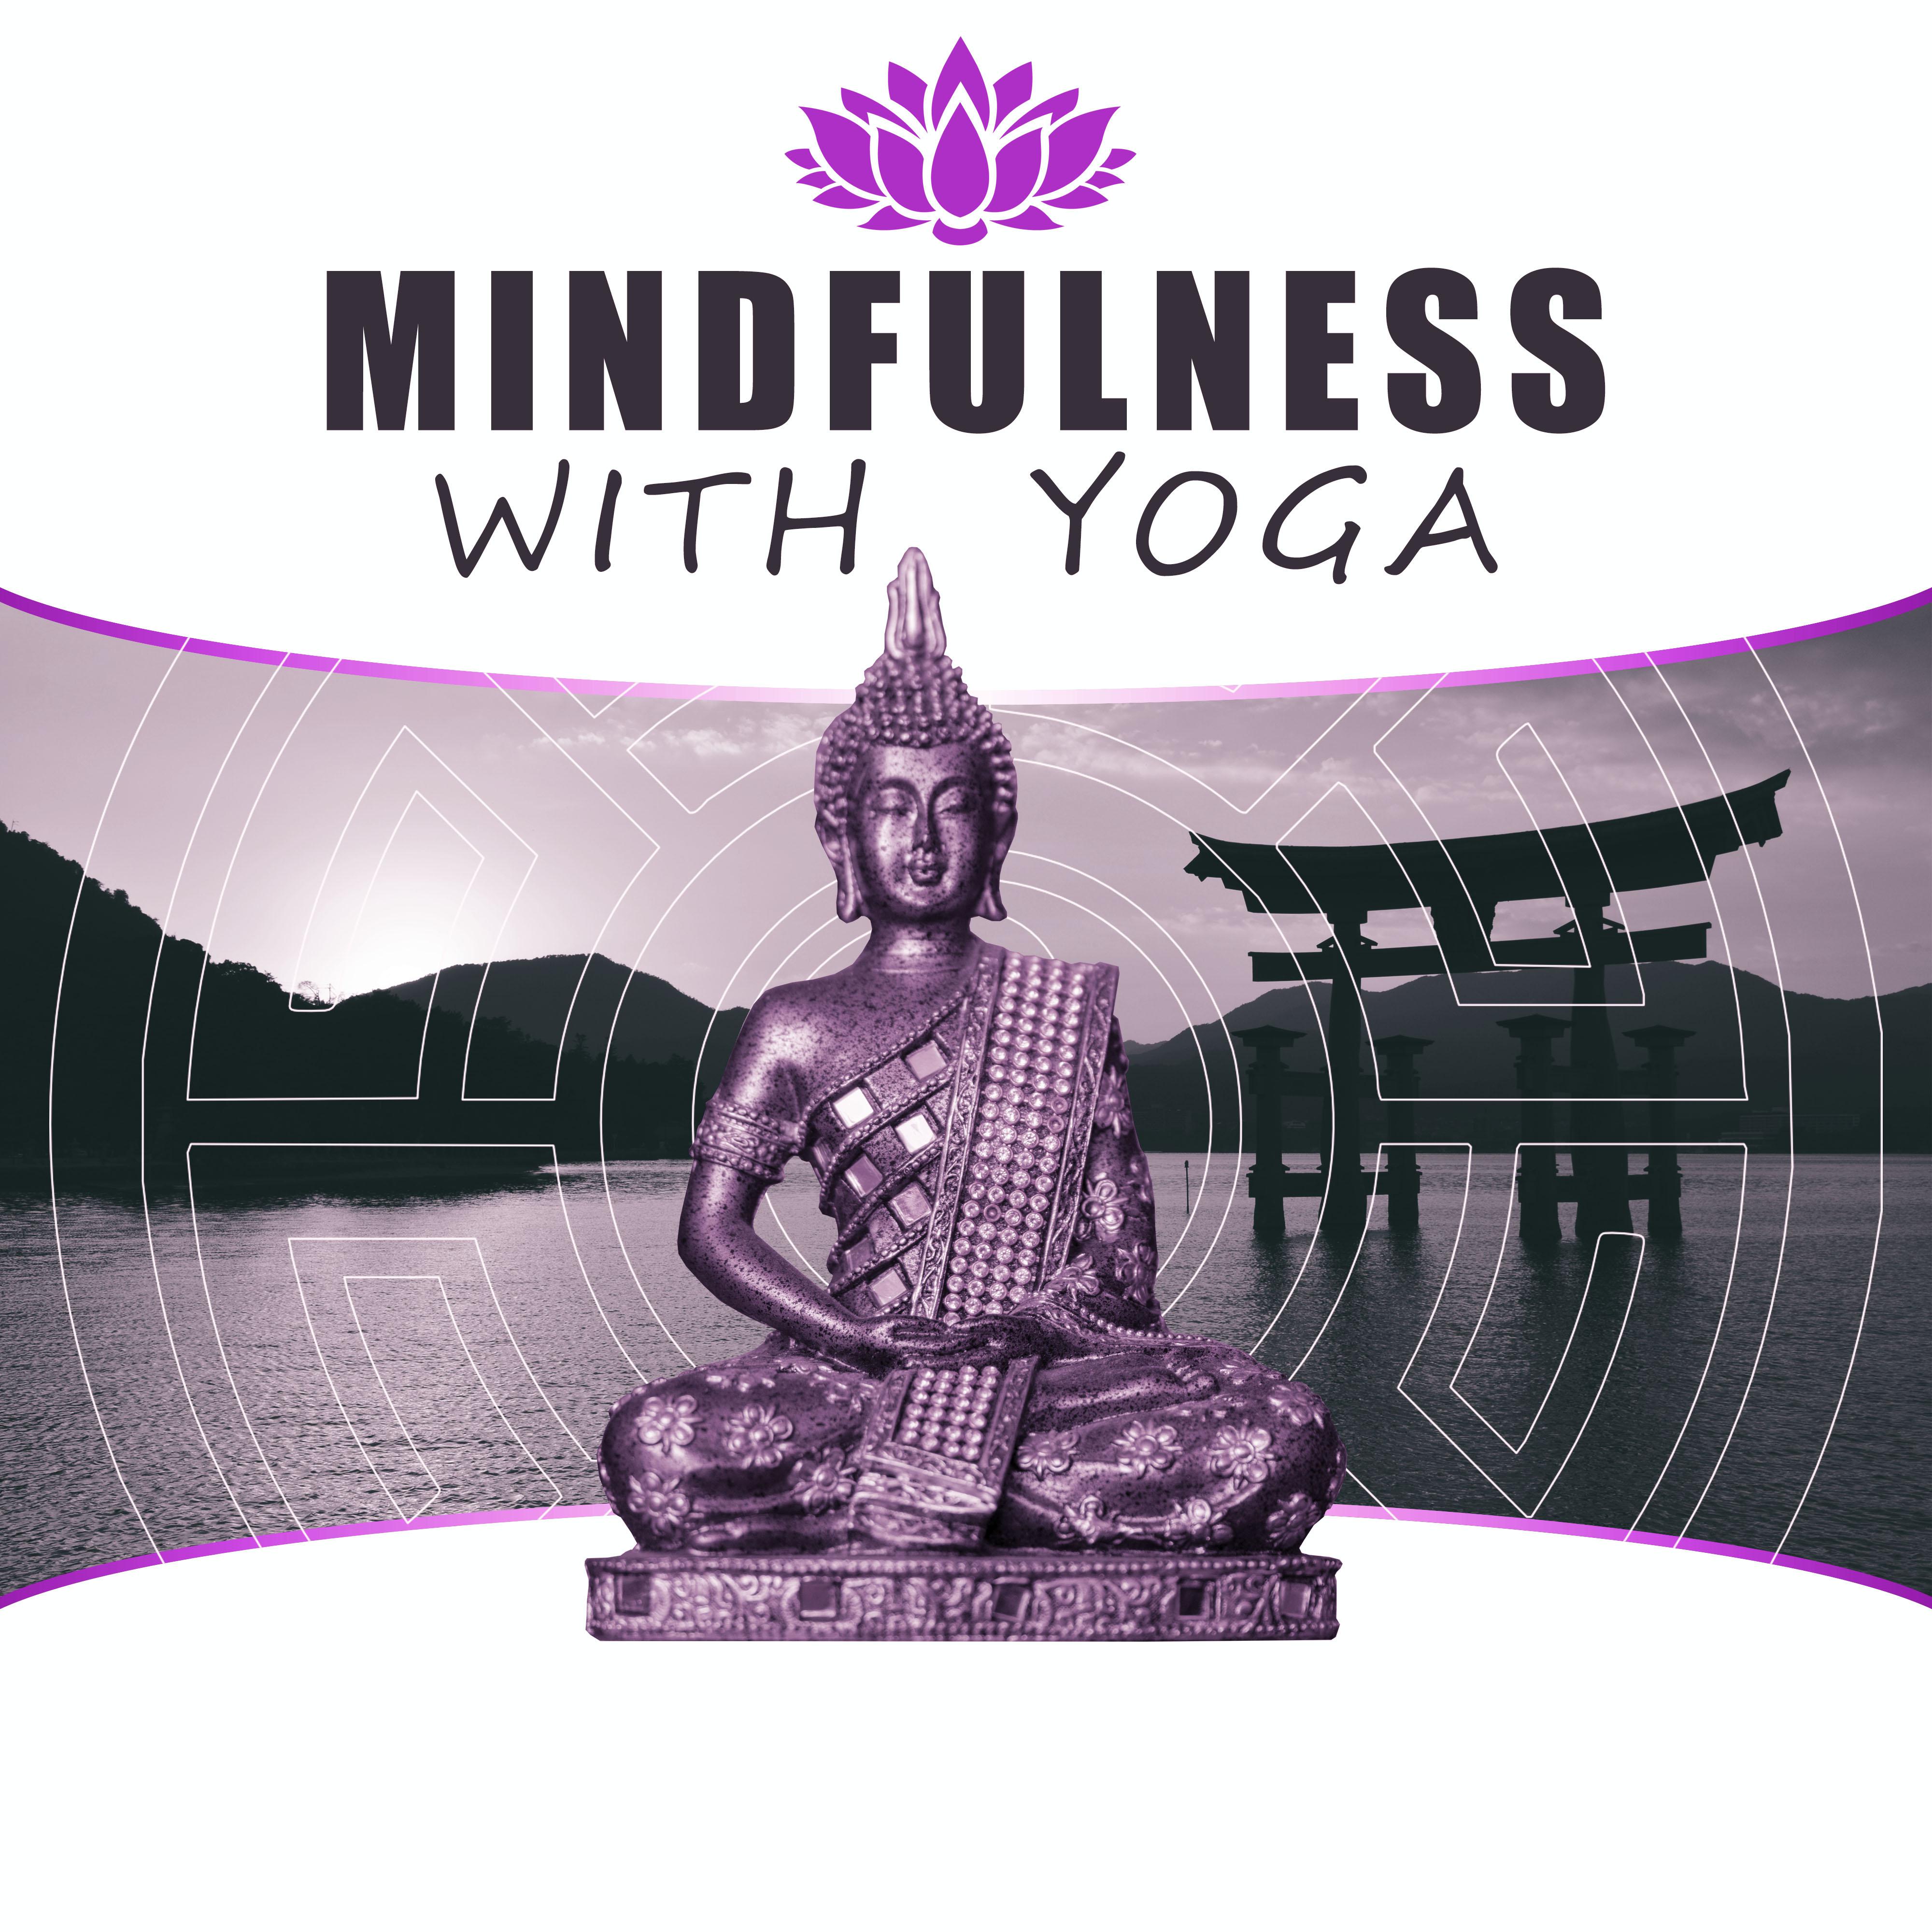 Mindfulness with Yoga – Full of Nature Sounds for Reiki, Yoga Meditation, Improve Inner Peace, Feel Deep Relax Music